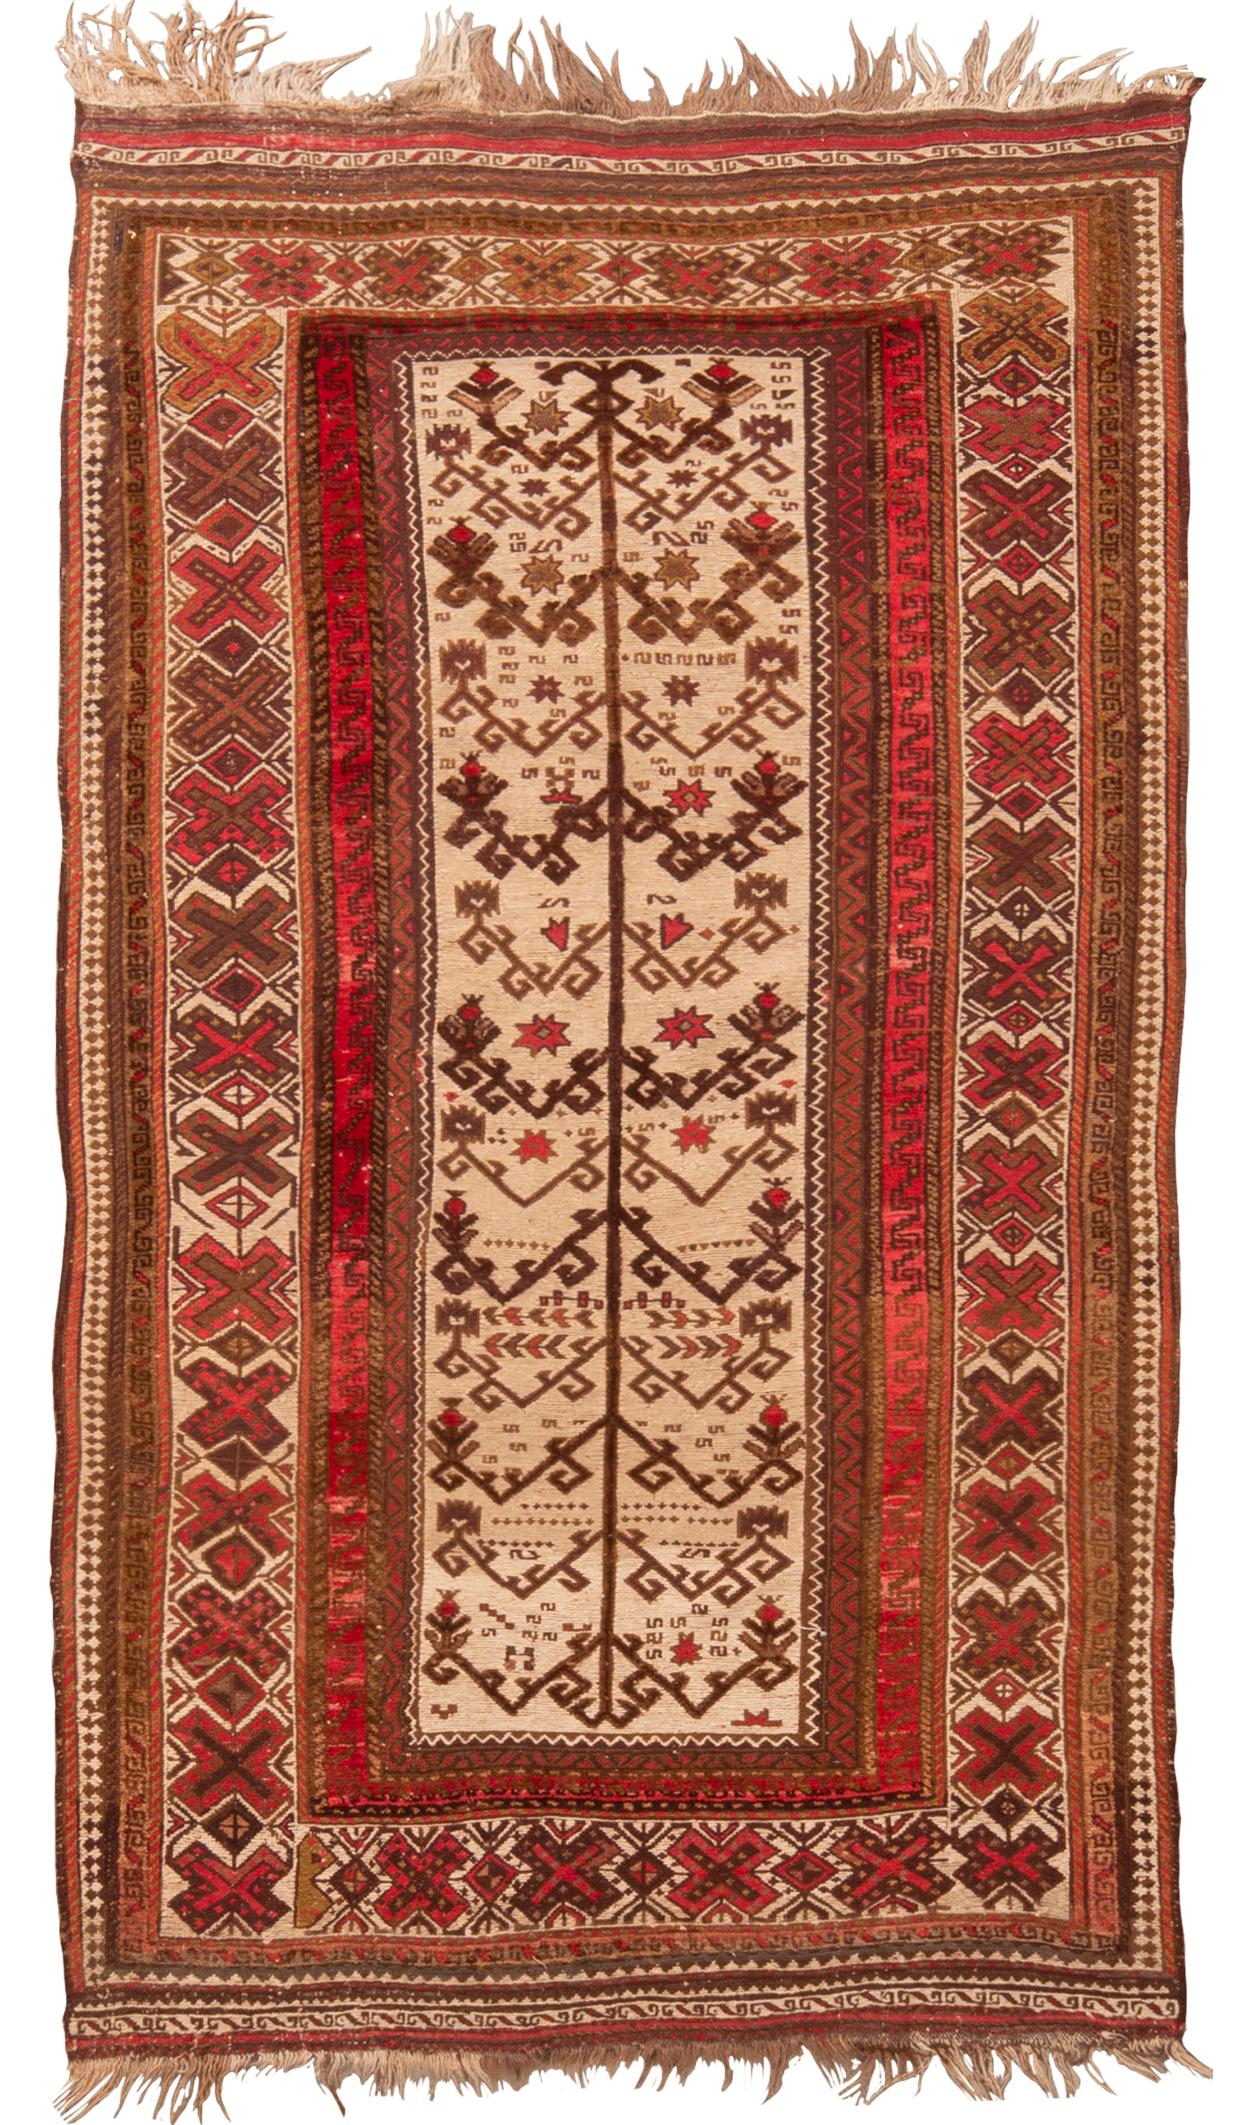 Originating from Afghanistan in 1970, this vintage transitional Afghan Kilim features a combination of distinct and uncommon Persian symbols in its all-over field design. Flat-woven in a tight wool pile, the field motif employs a geometric floral